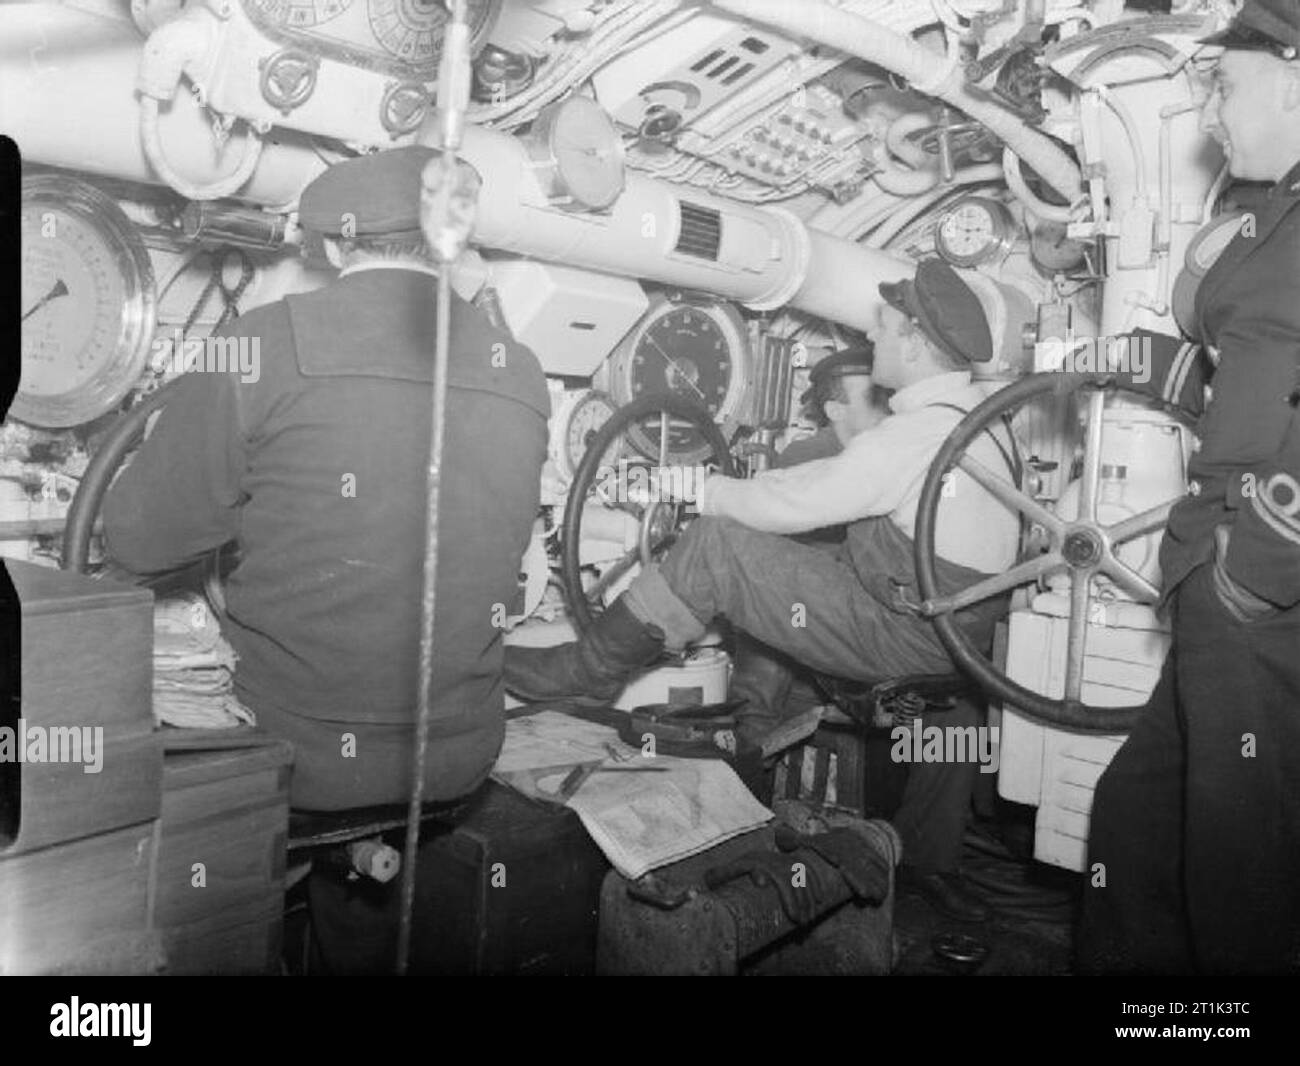 The Royal Navy during the Second World War The Central Control Room, from where diving and surfacing manoeuvres are controlled on board the Dutch submarine O 14. The Hydroplane helmsmen sit in front of their gauges depth-keeping. One of the depth gauges indicates 30 feet. The Chief Engineer is seen right, an Officer in Dutch Submarines, a Chief Petty Officer in British Vessels. Stock Photo